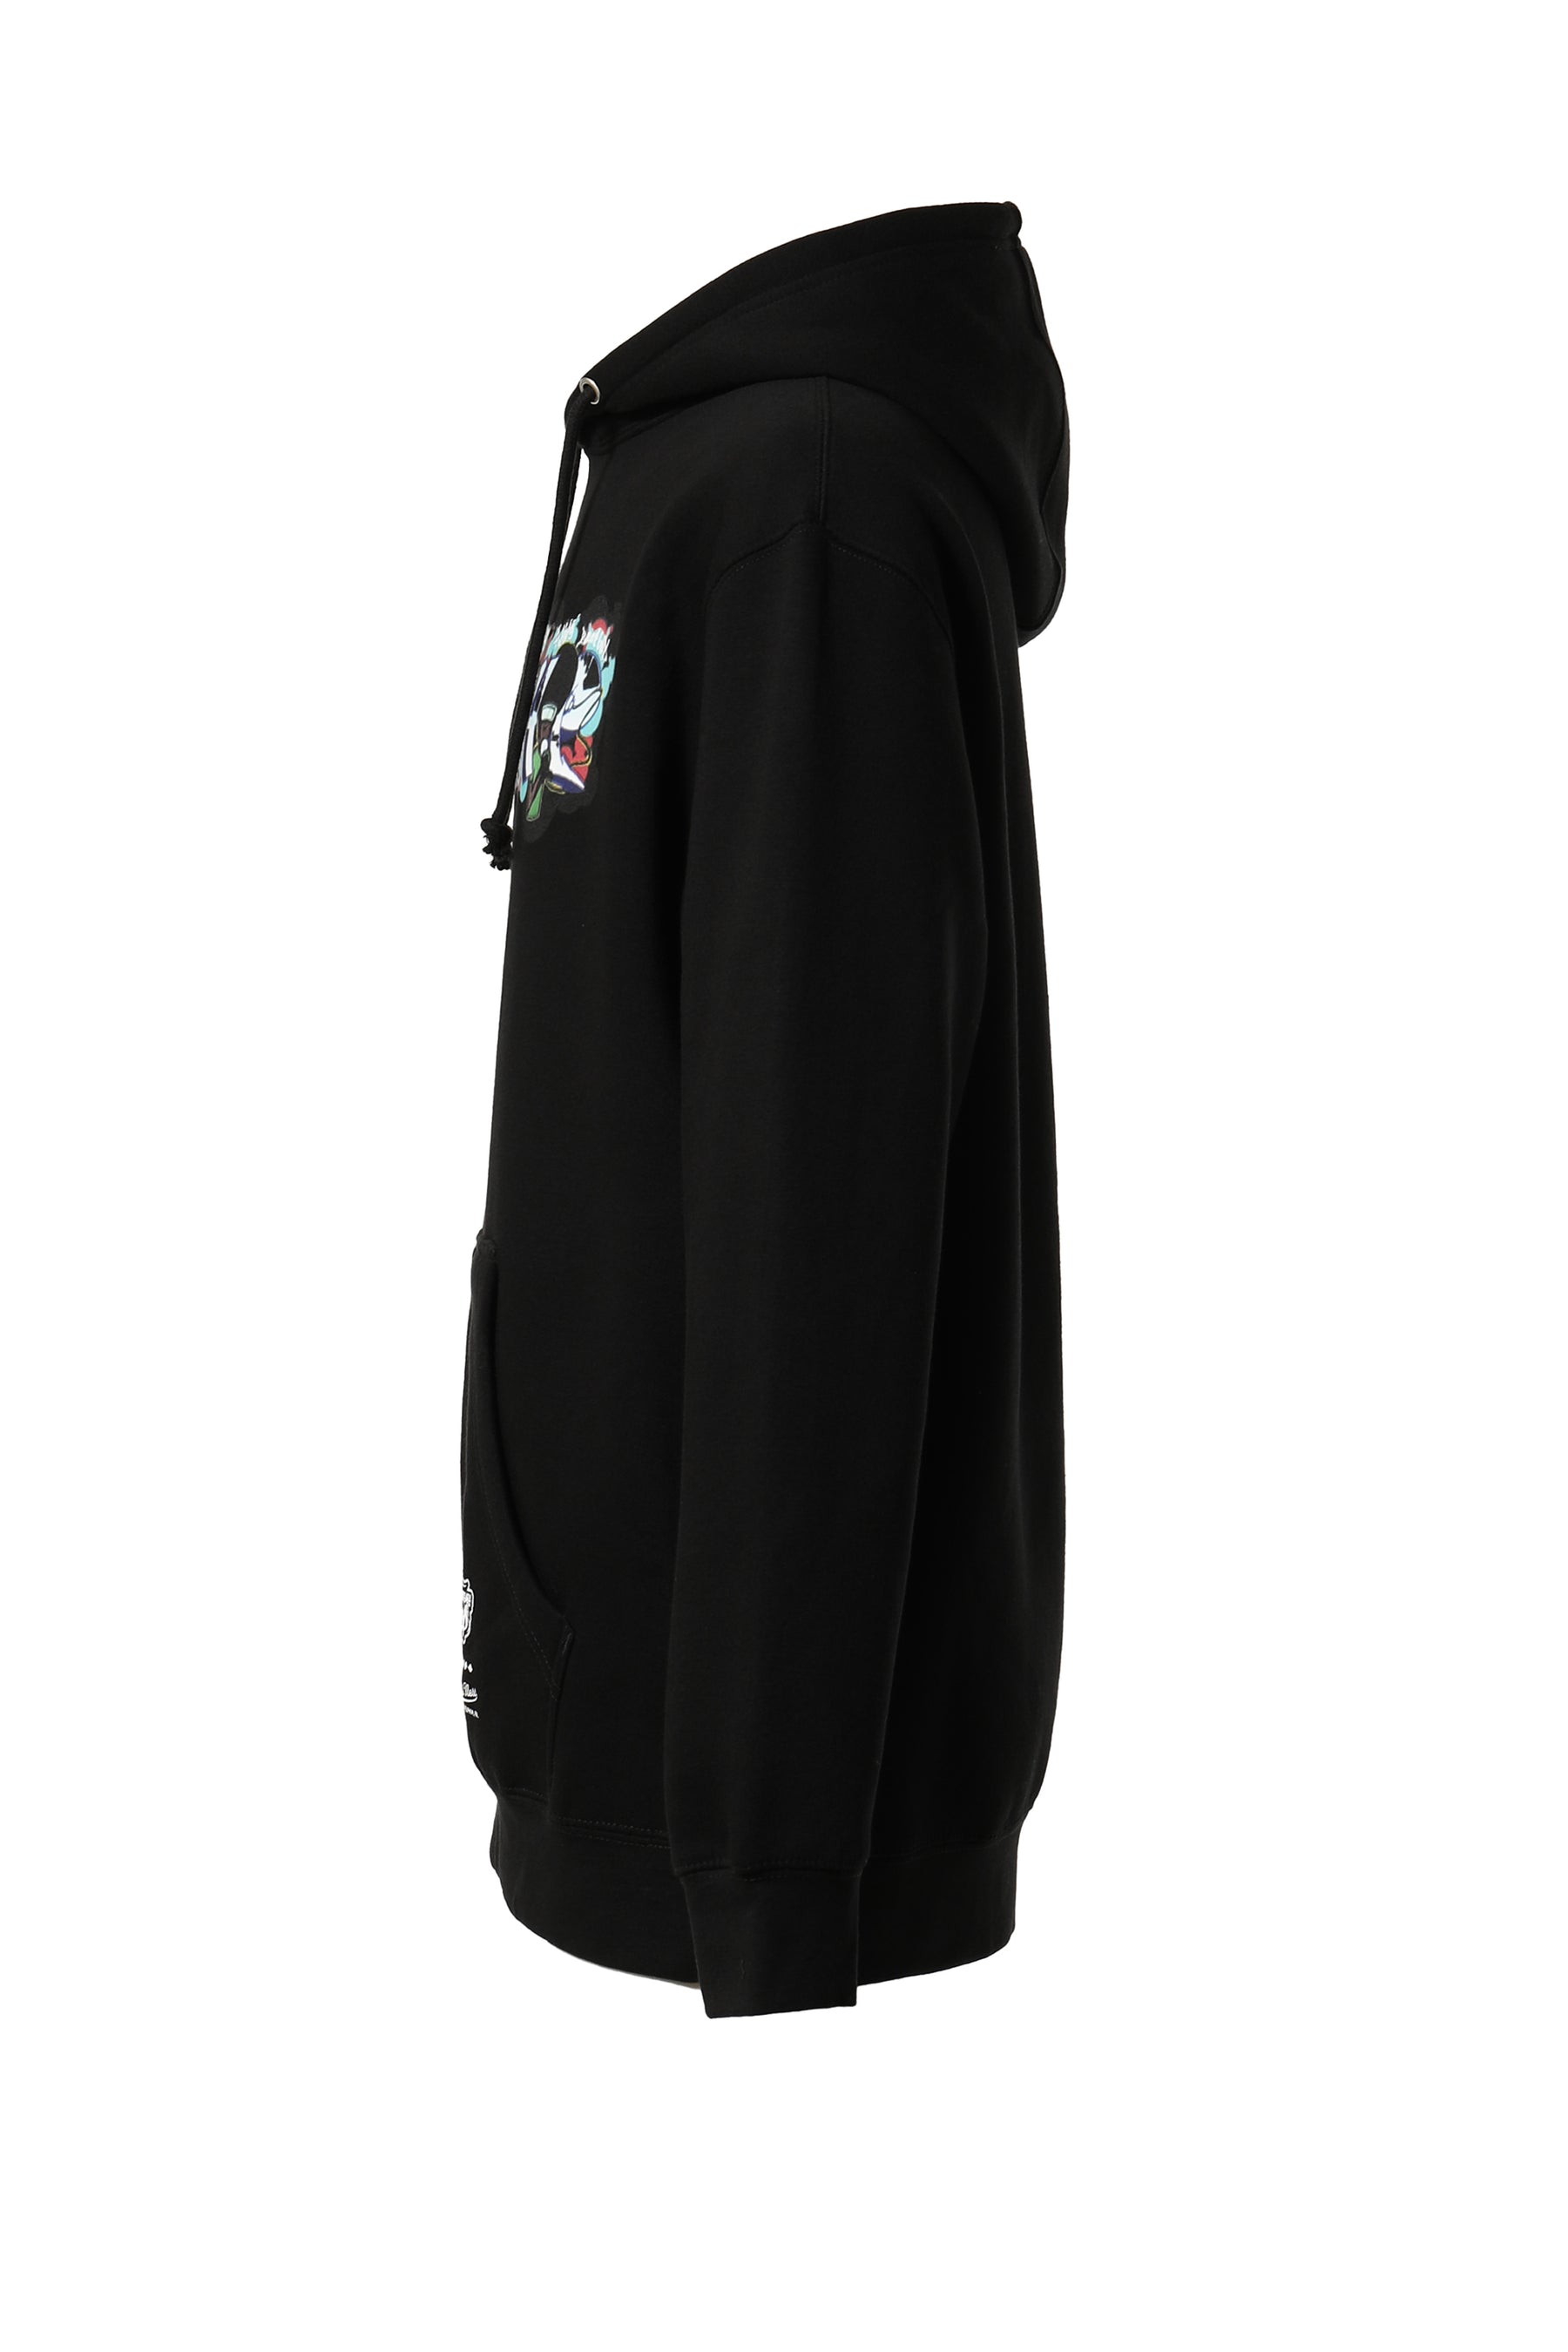 50TH AOHH GRAFF HOODIE COLLAB(EXCLUSIVE) / BLK